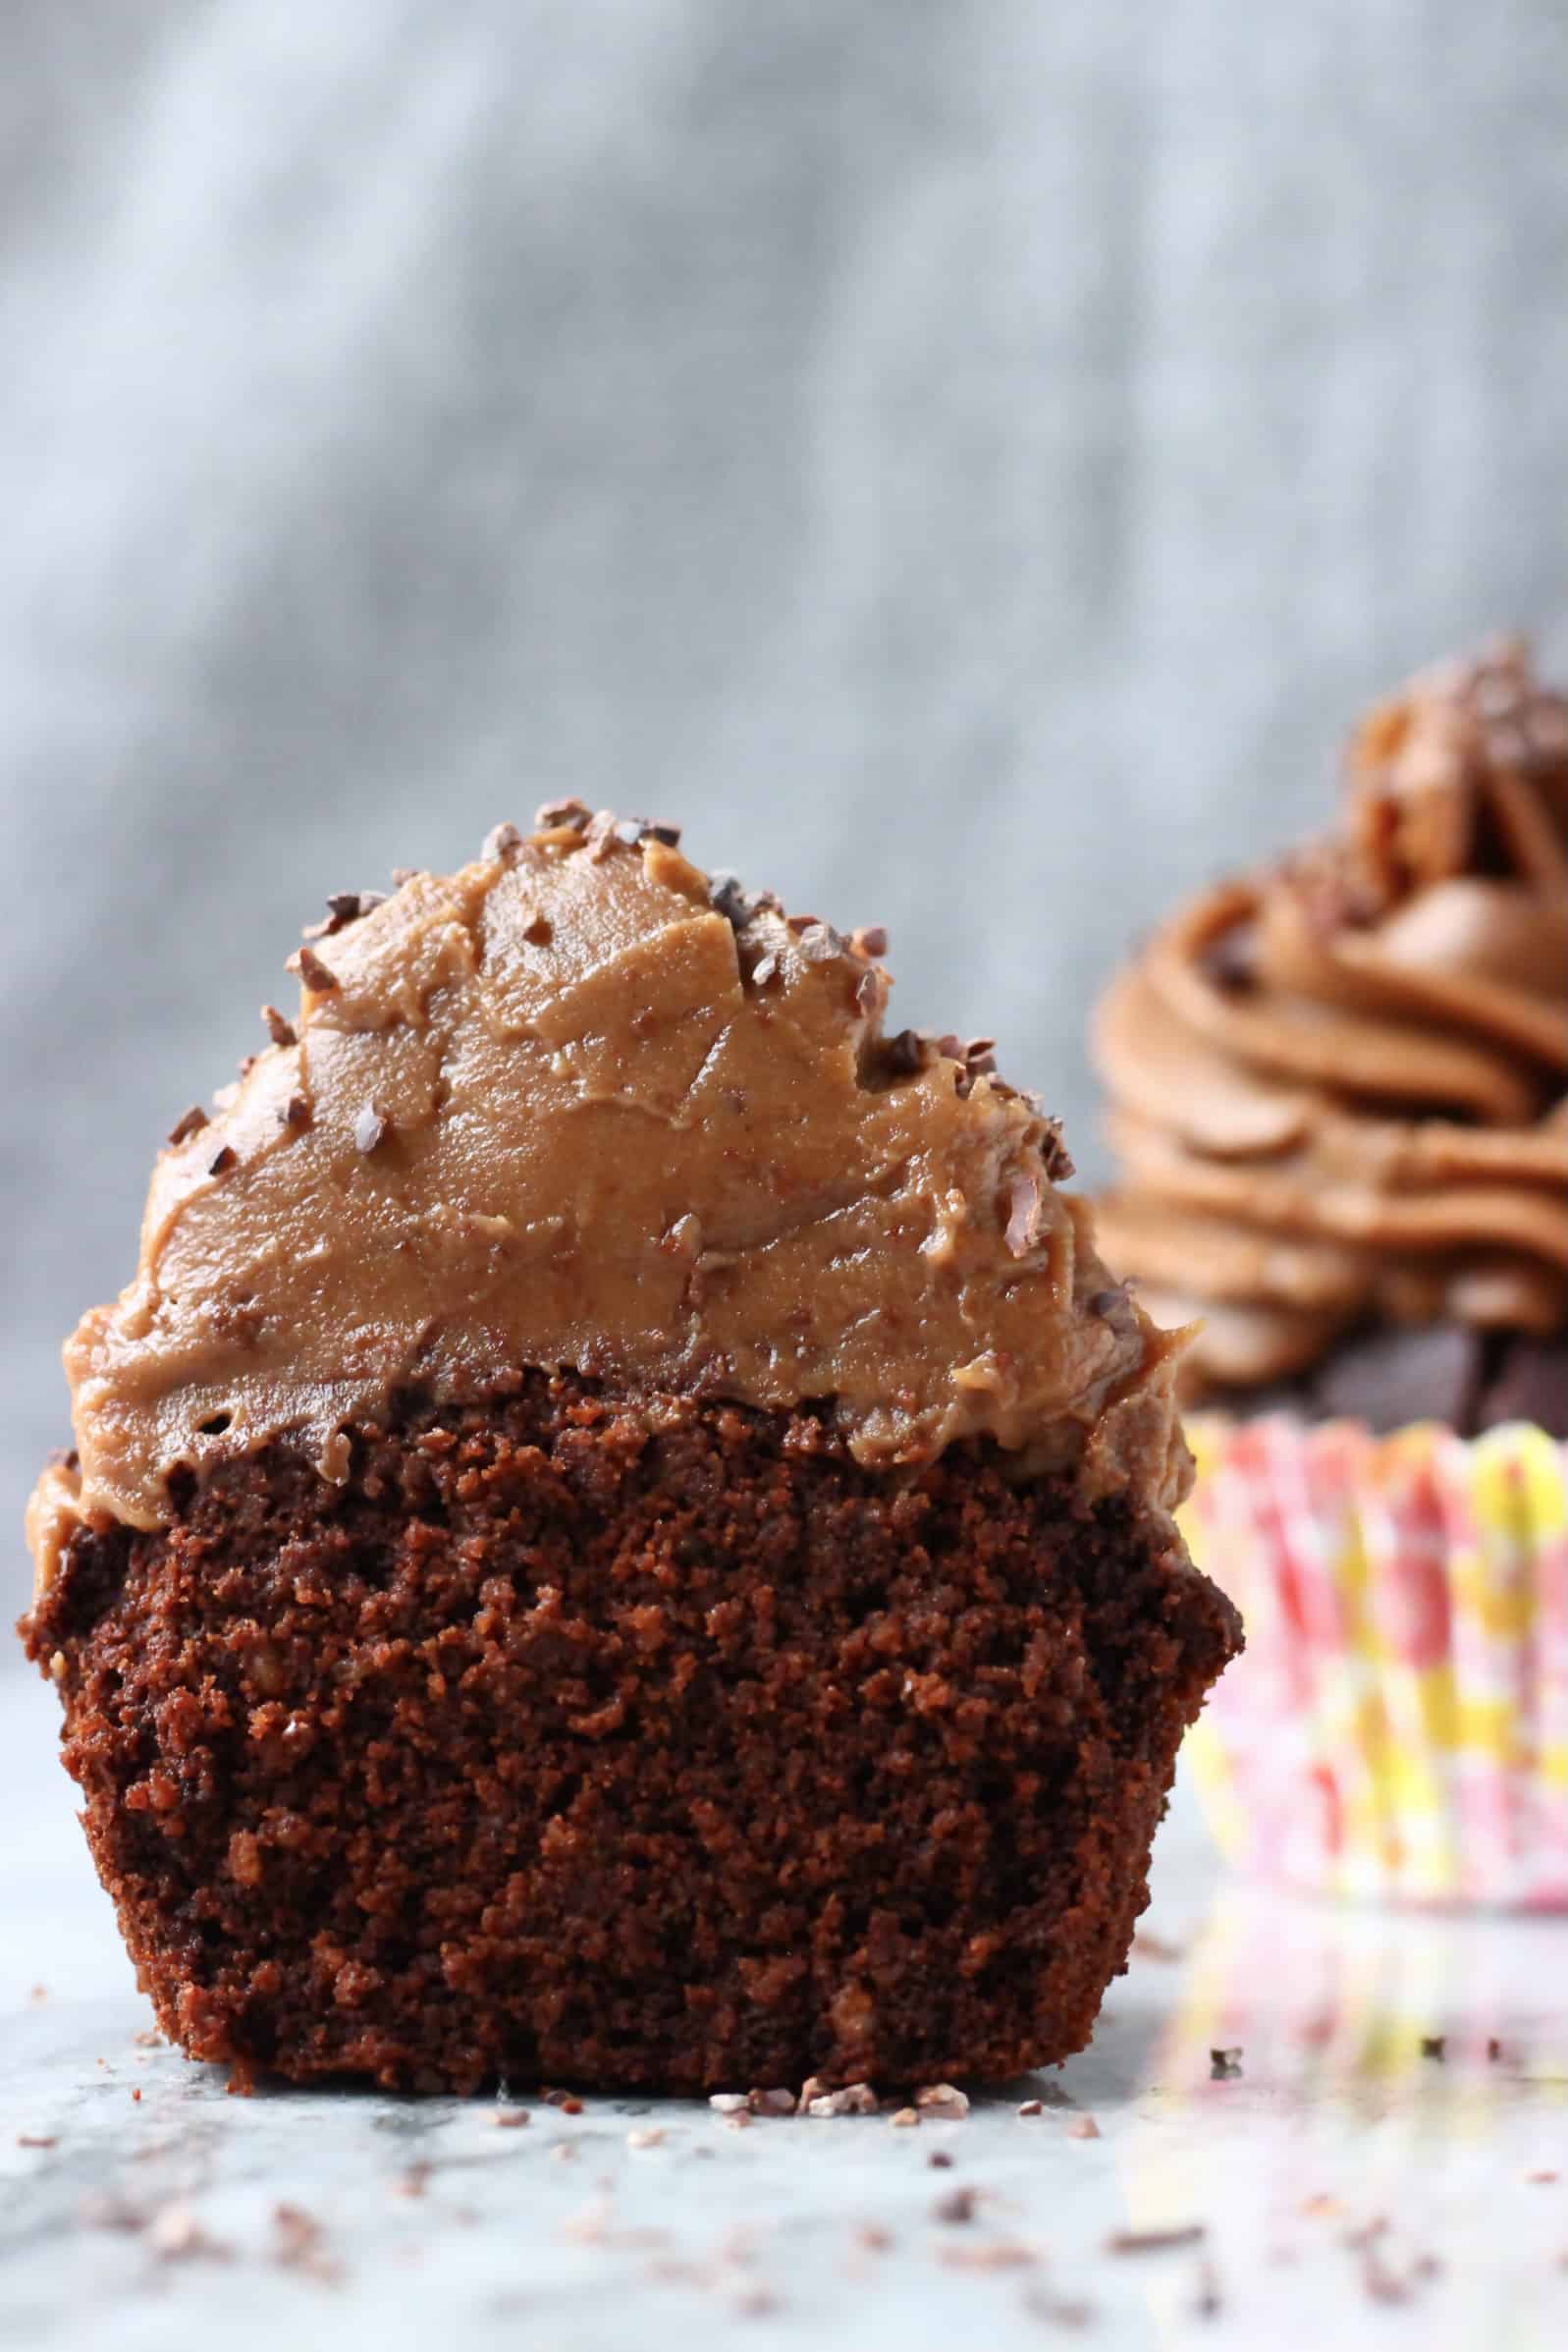 A gluten-free vegan chocolate cupcake with frosting cut in half with a cupcake in the background